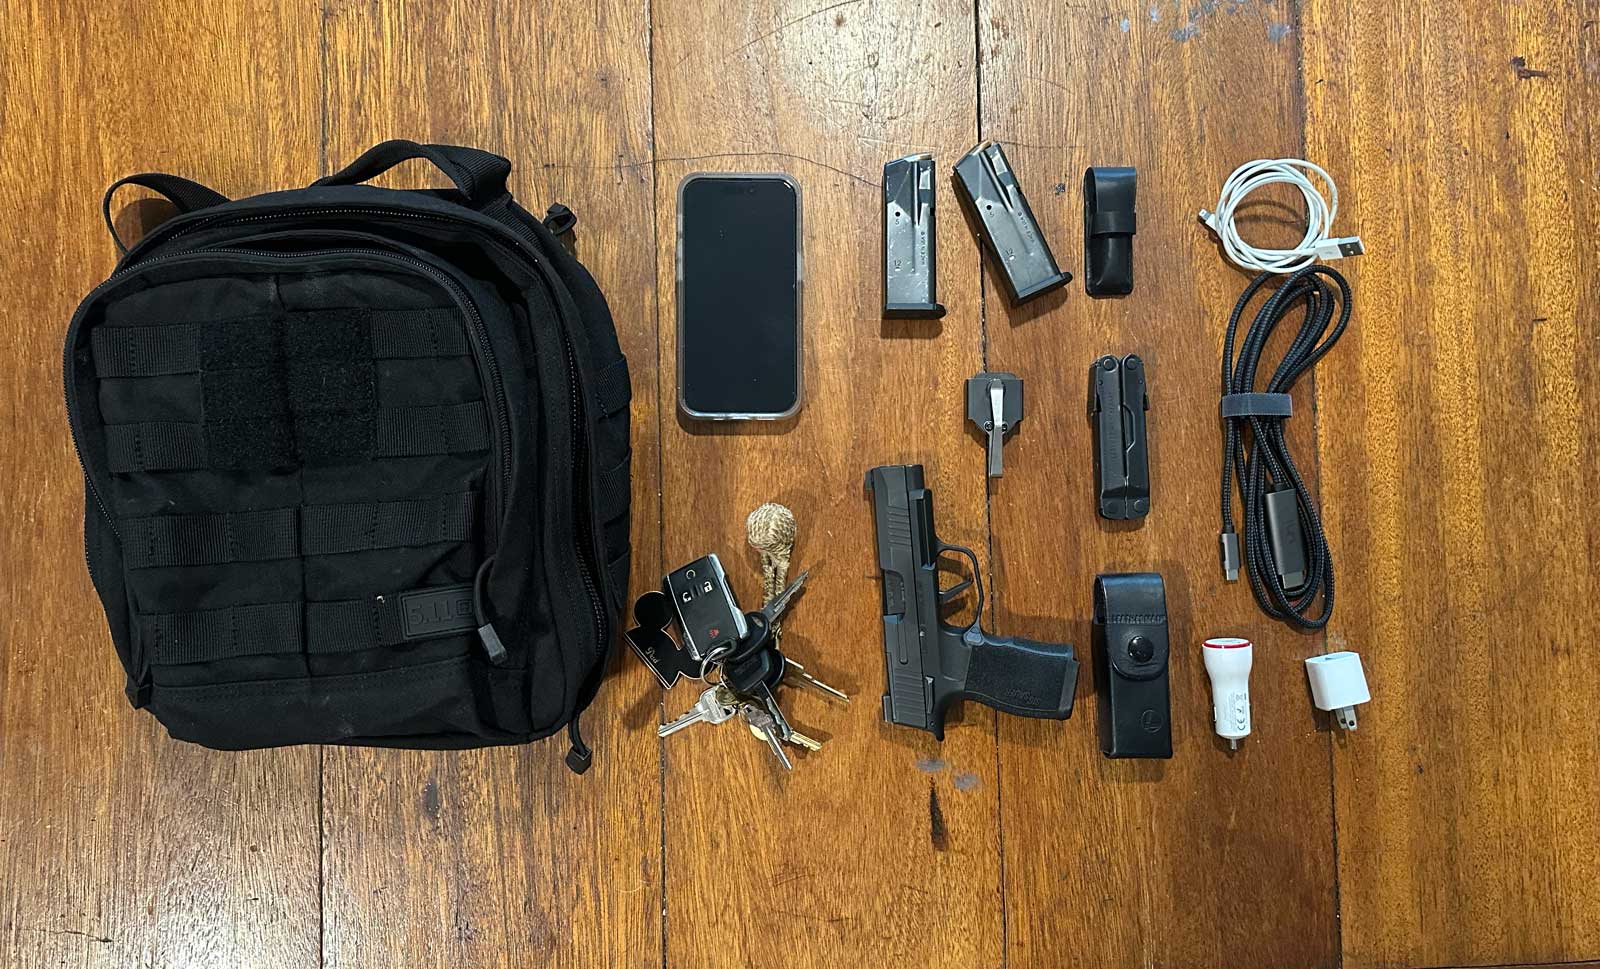 EDC Bag Loadout: Essential Contents for Everyday Life